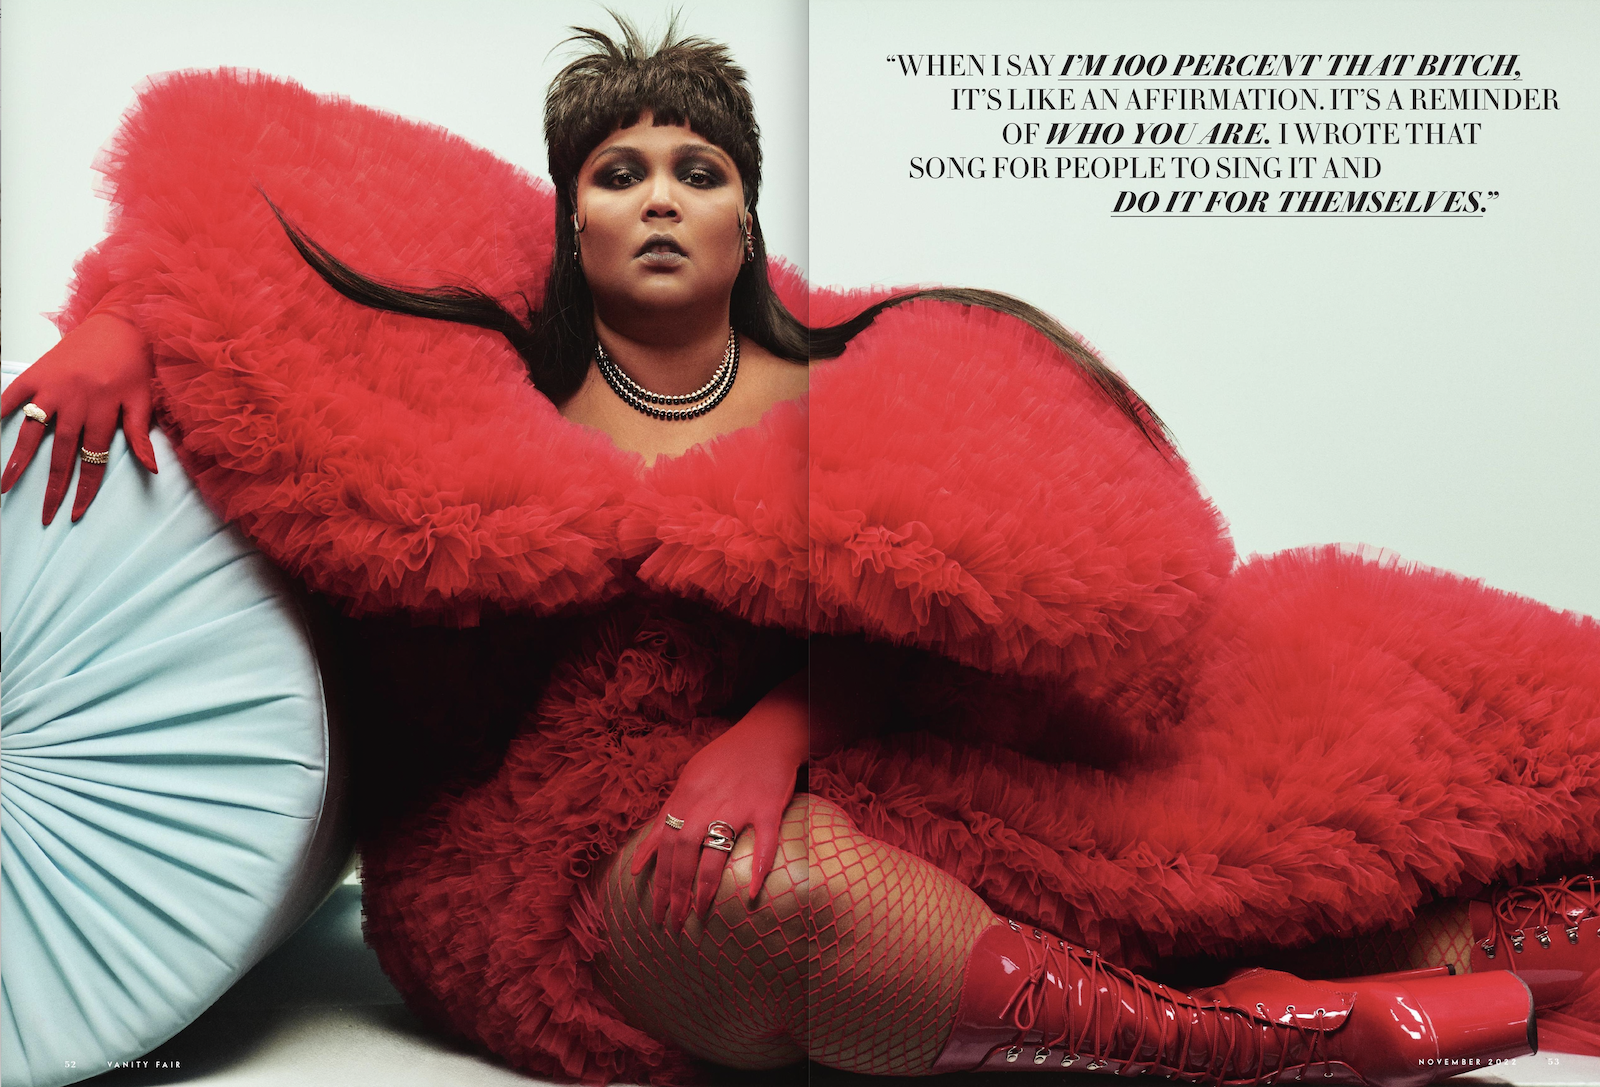 Lizzo-by-Campbell-Addy-for-Vanity Fair-US-00001.png